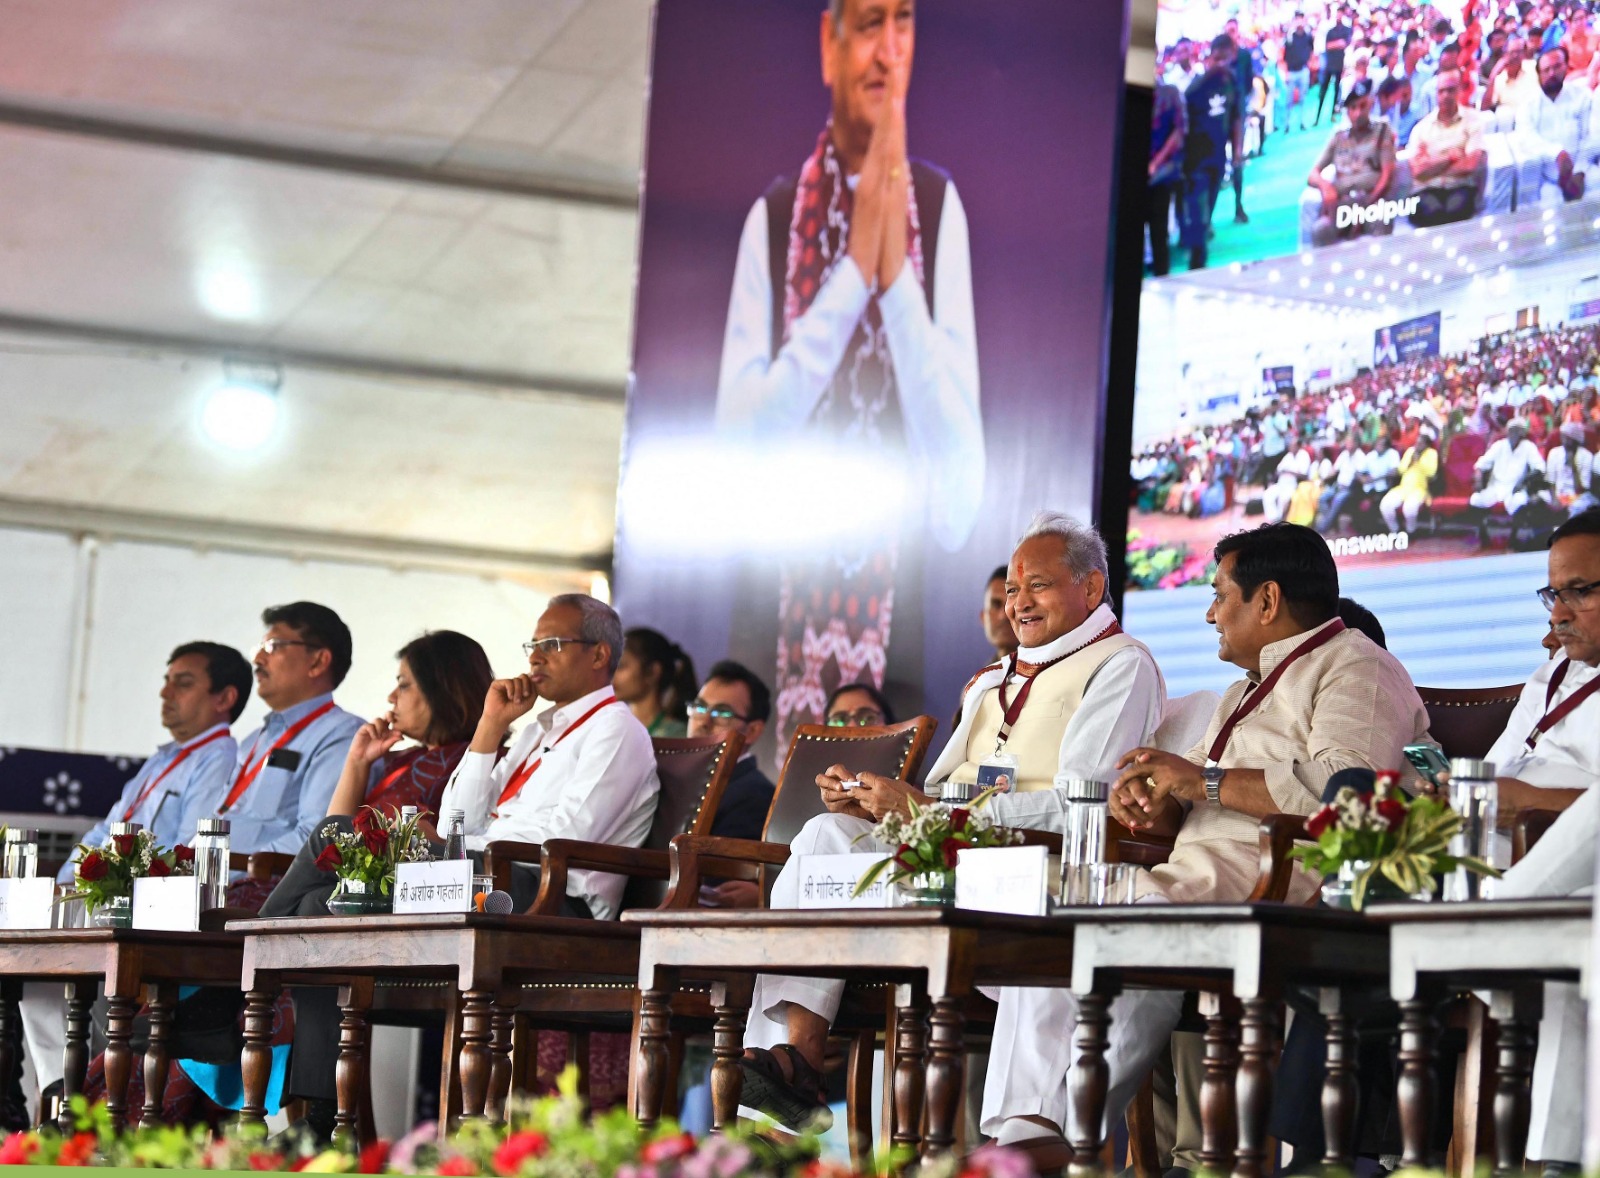 We aim to provide benefits of schemes to every needy: Chief Minister